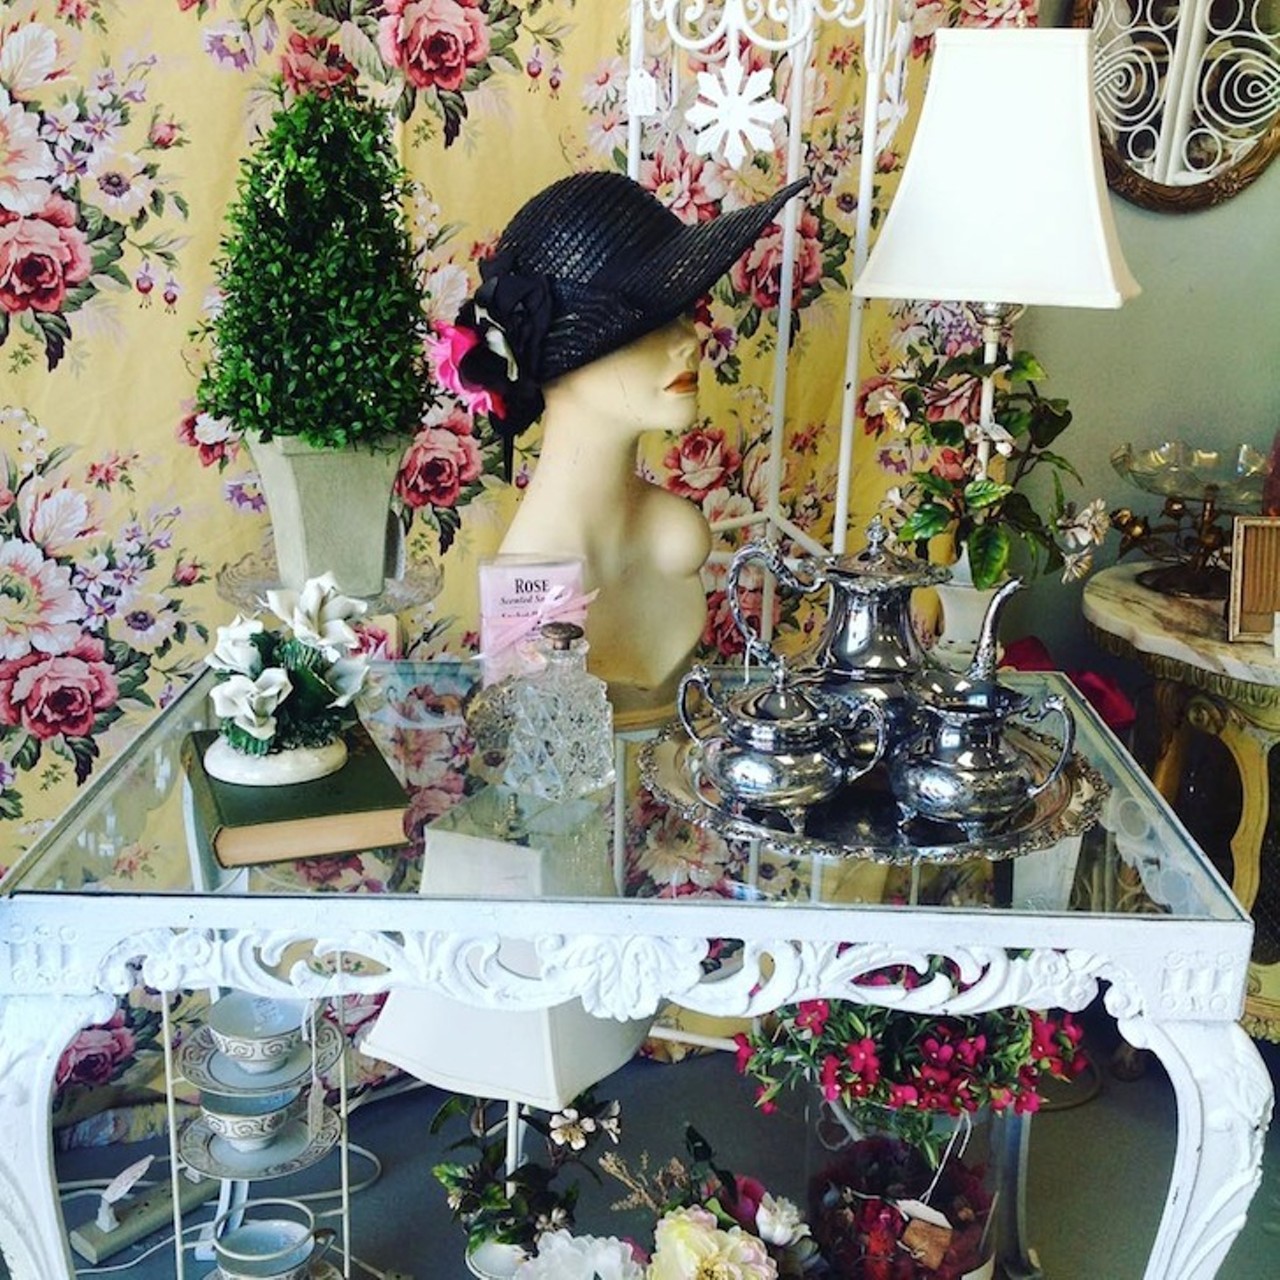 Lily Lace Antique Market
160 Lake Ave., Maitland | (407) 951-8883
Fancy finds await at this charming boutique, which is stocked with Victorian accents, shabby chic decor and fluttery French linens. 
Photo via Lilly Lace Antique Market Facebook